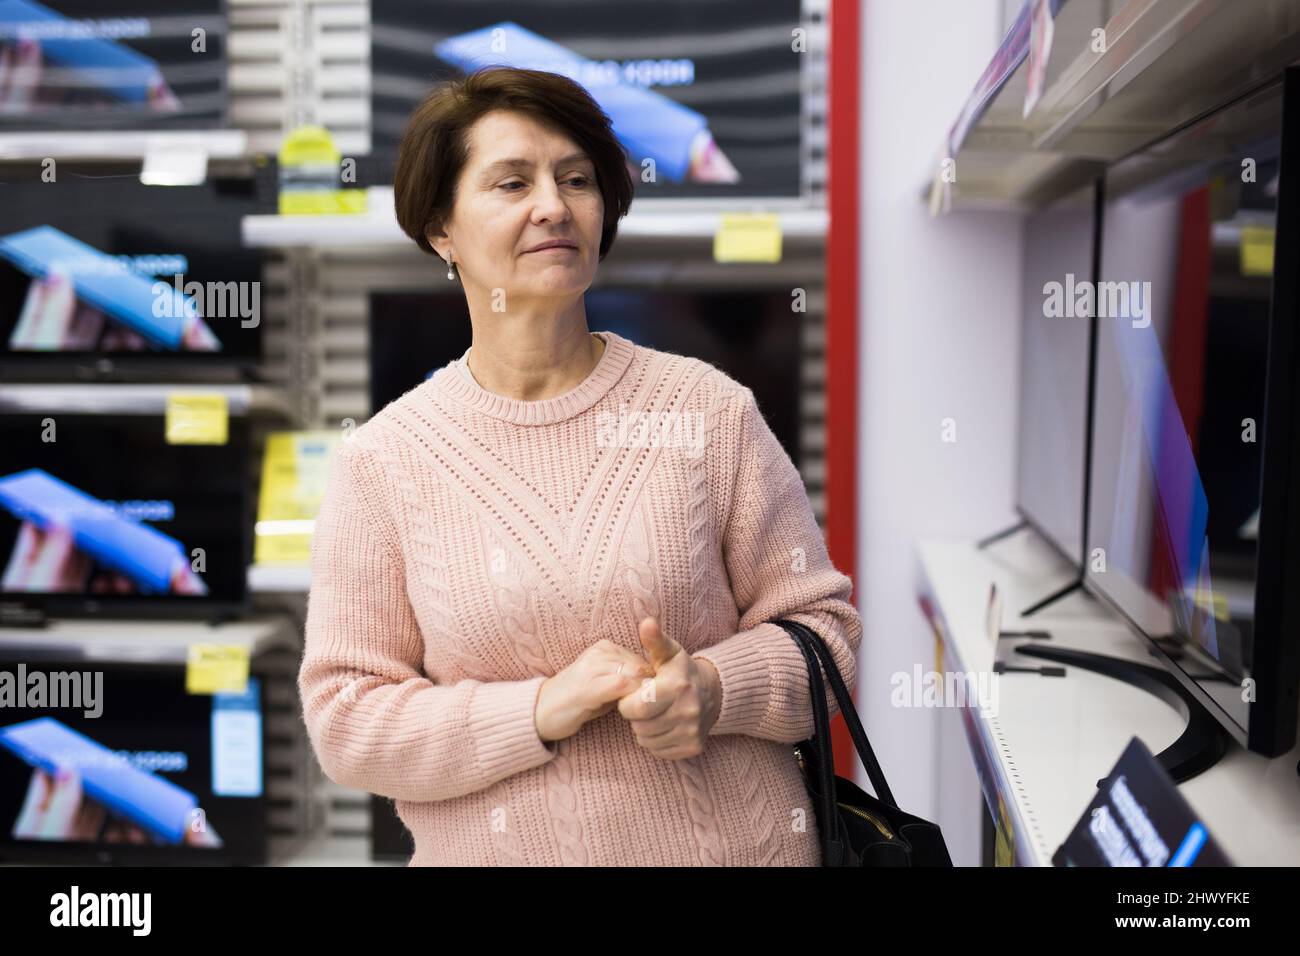 Mature woman choosing television in appliance store Stock Photo